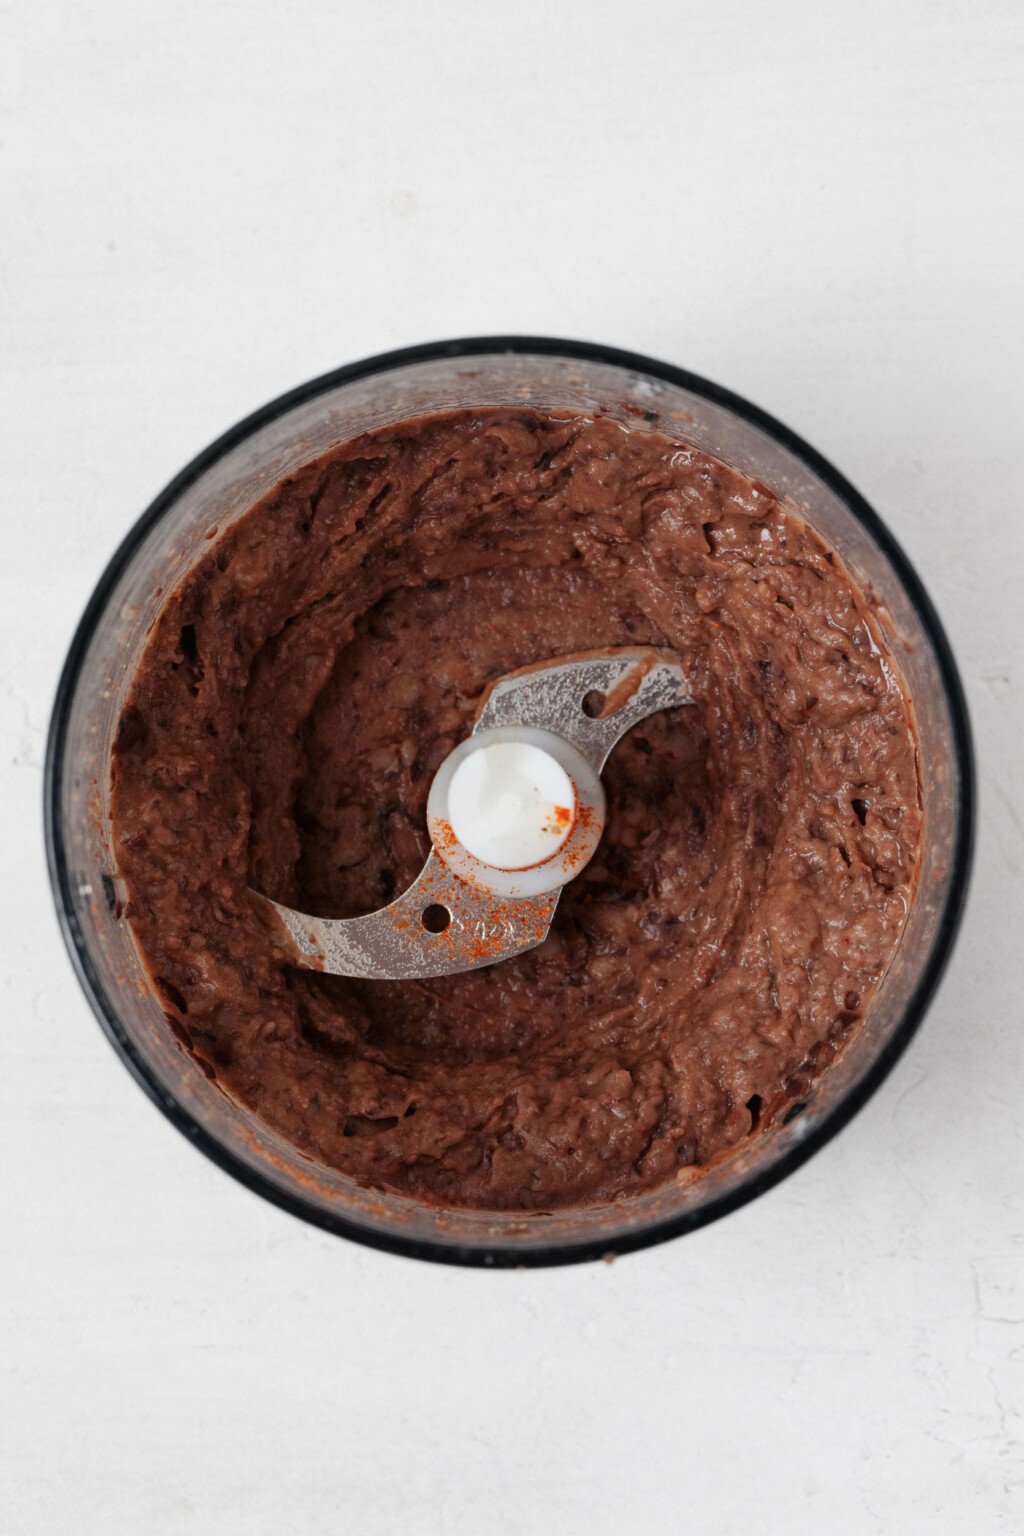 The bowl of a food processor is being used to make a creamy spread with black beans.